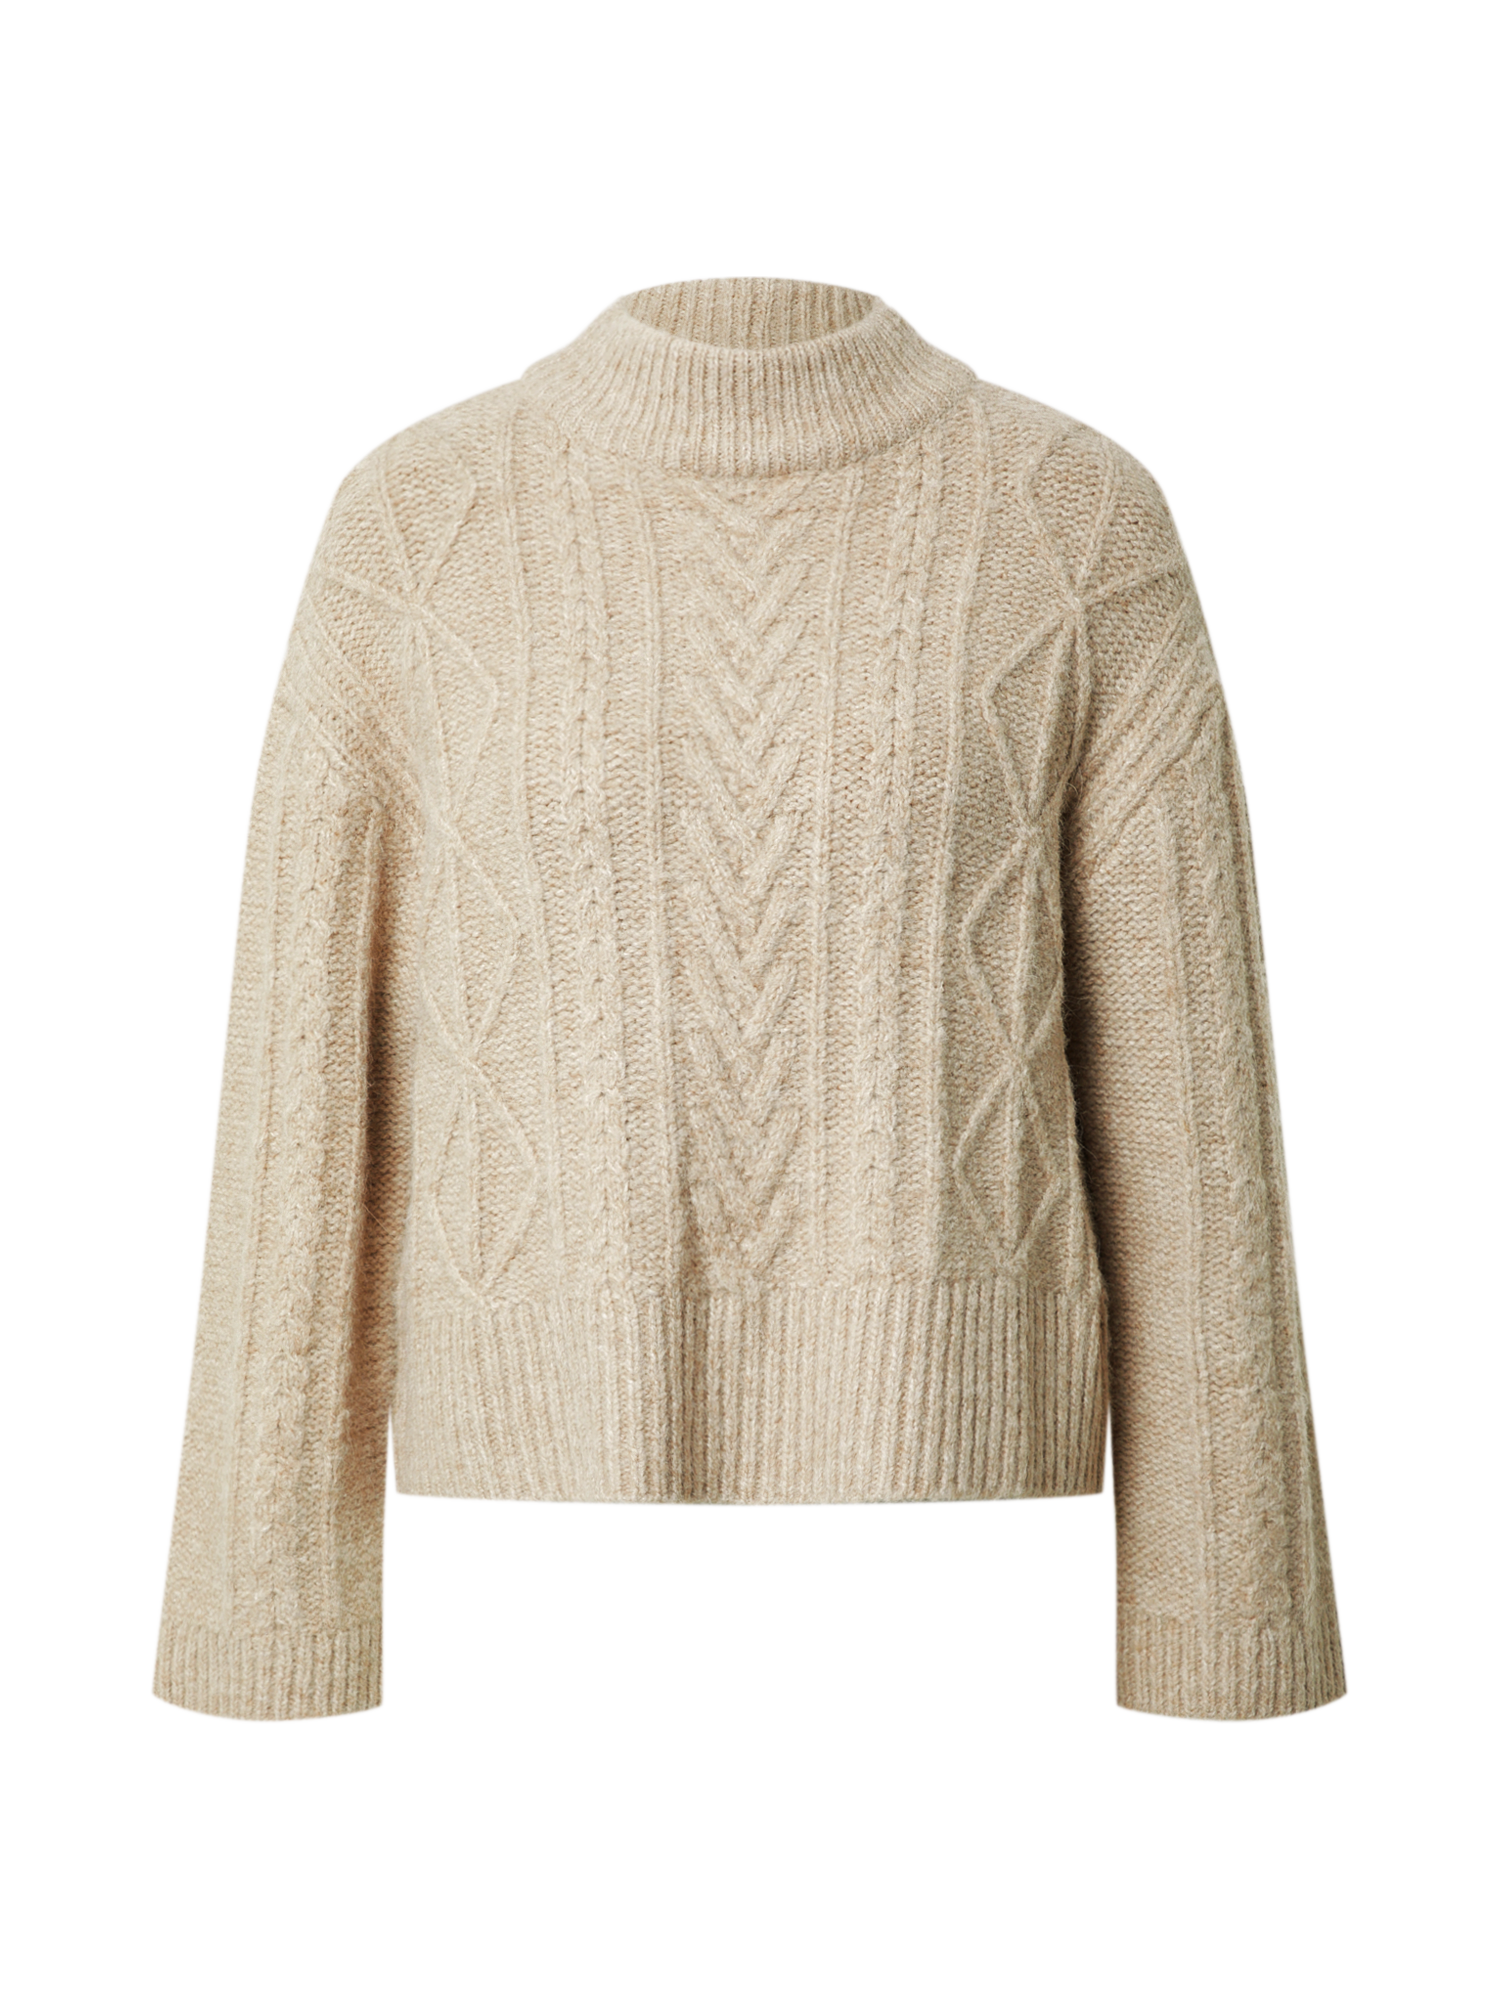 Donna zOCZy LeGer by Lena Gercke Pullover Arina in Beige 